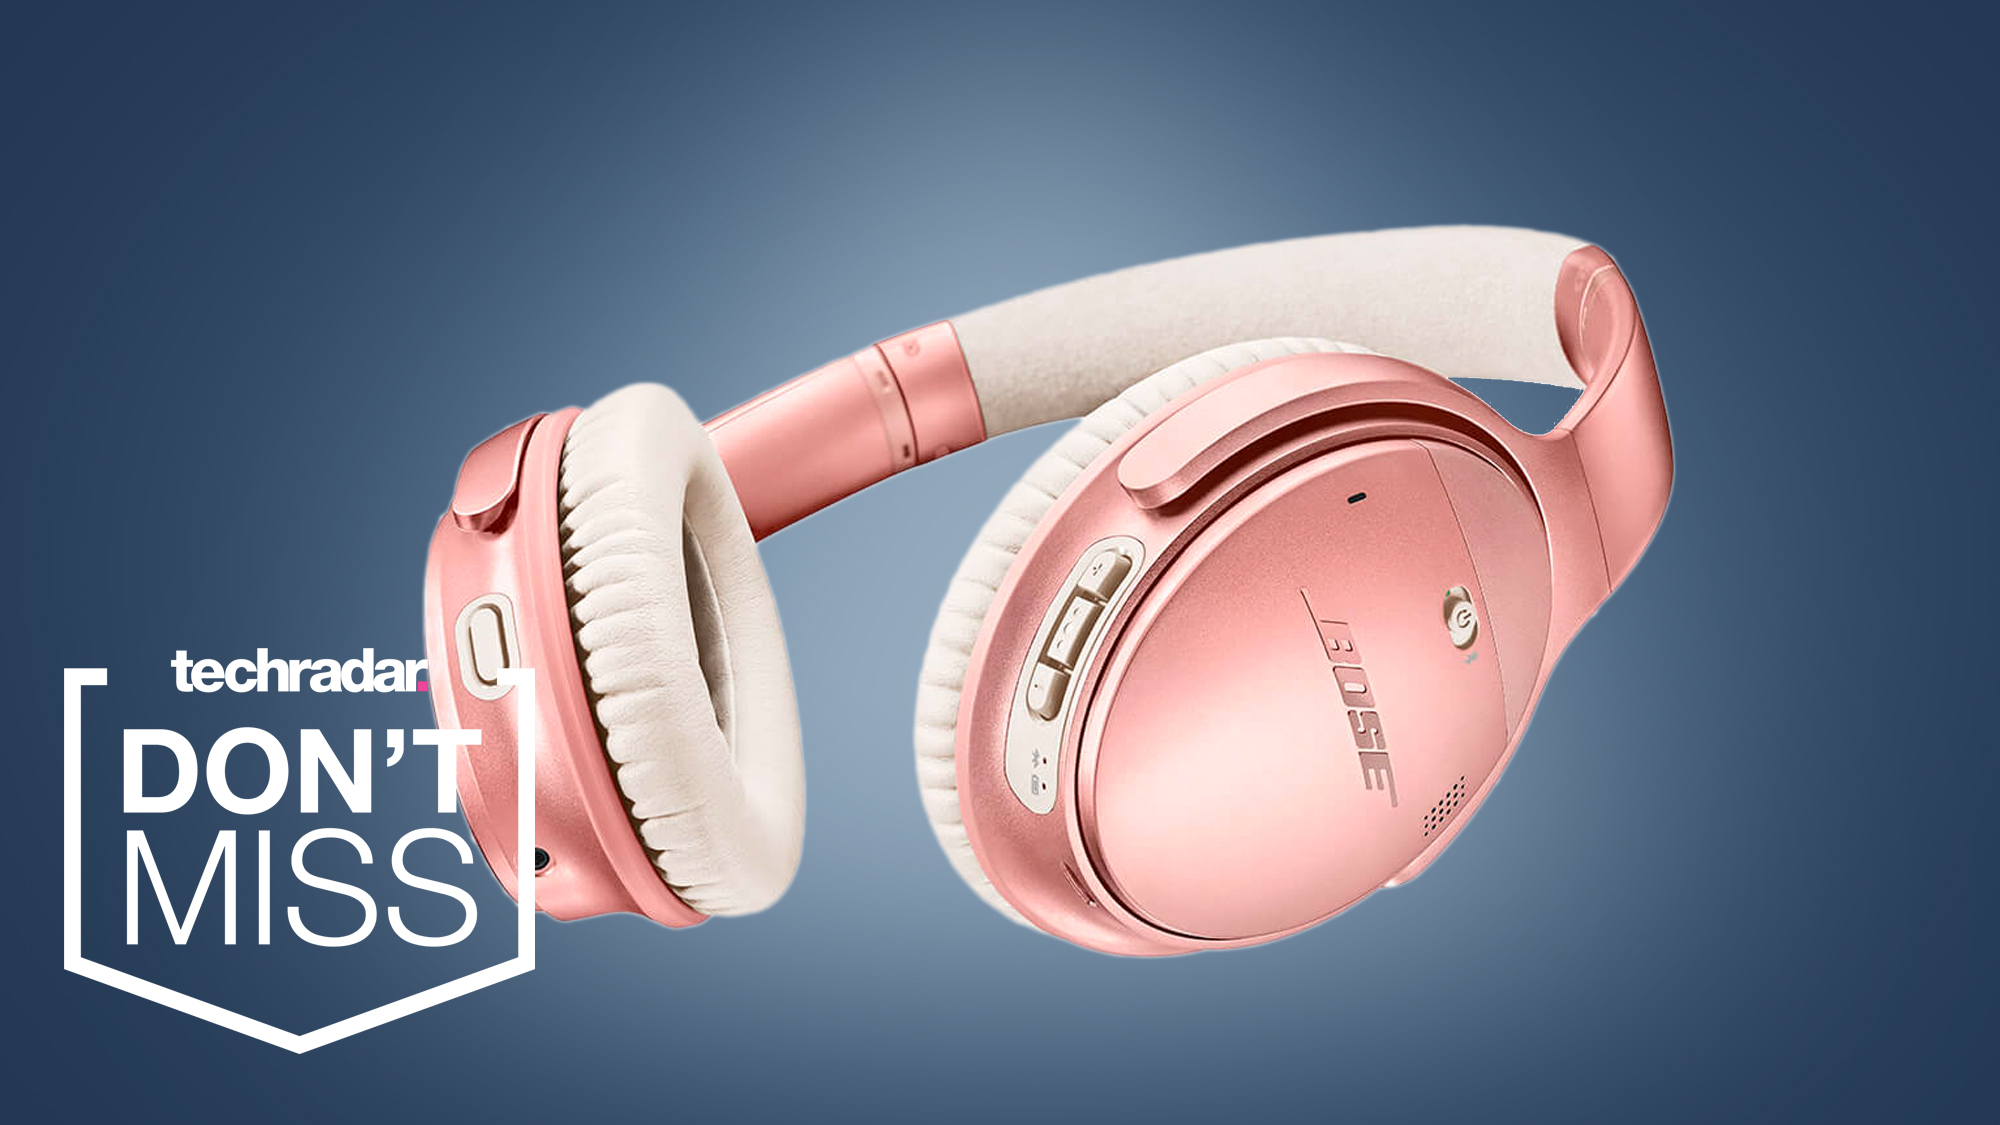 Bose's excellent noise-cancelling headphones price |